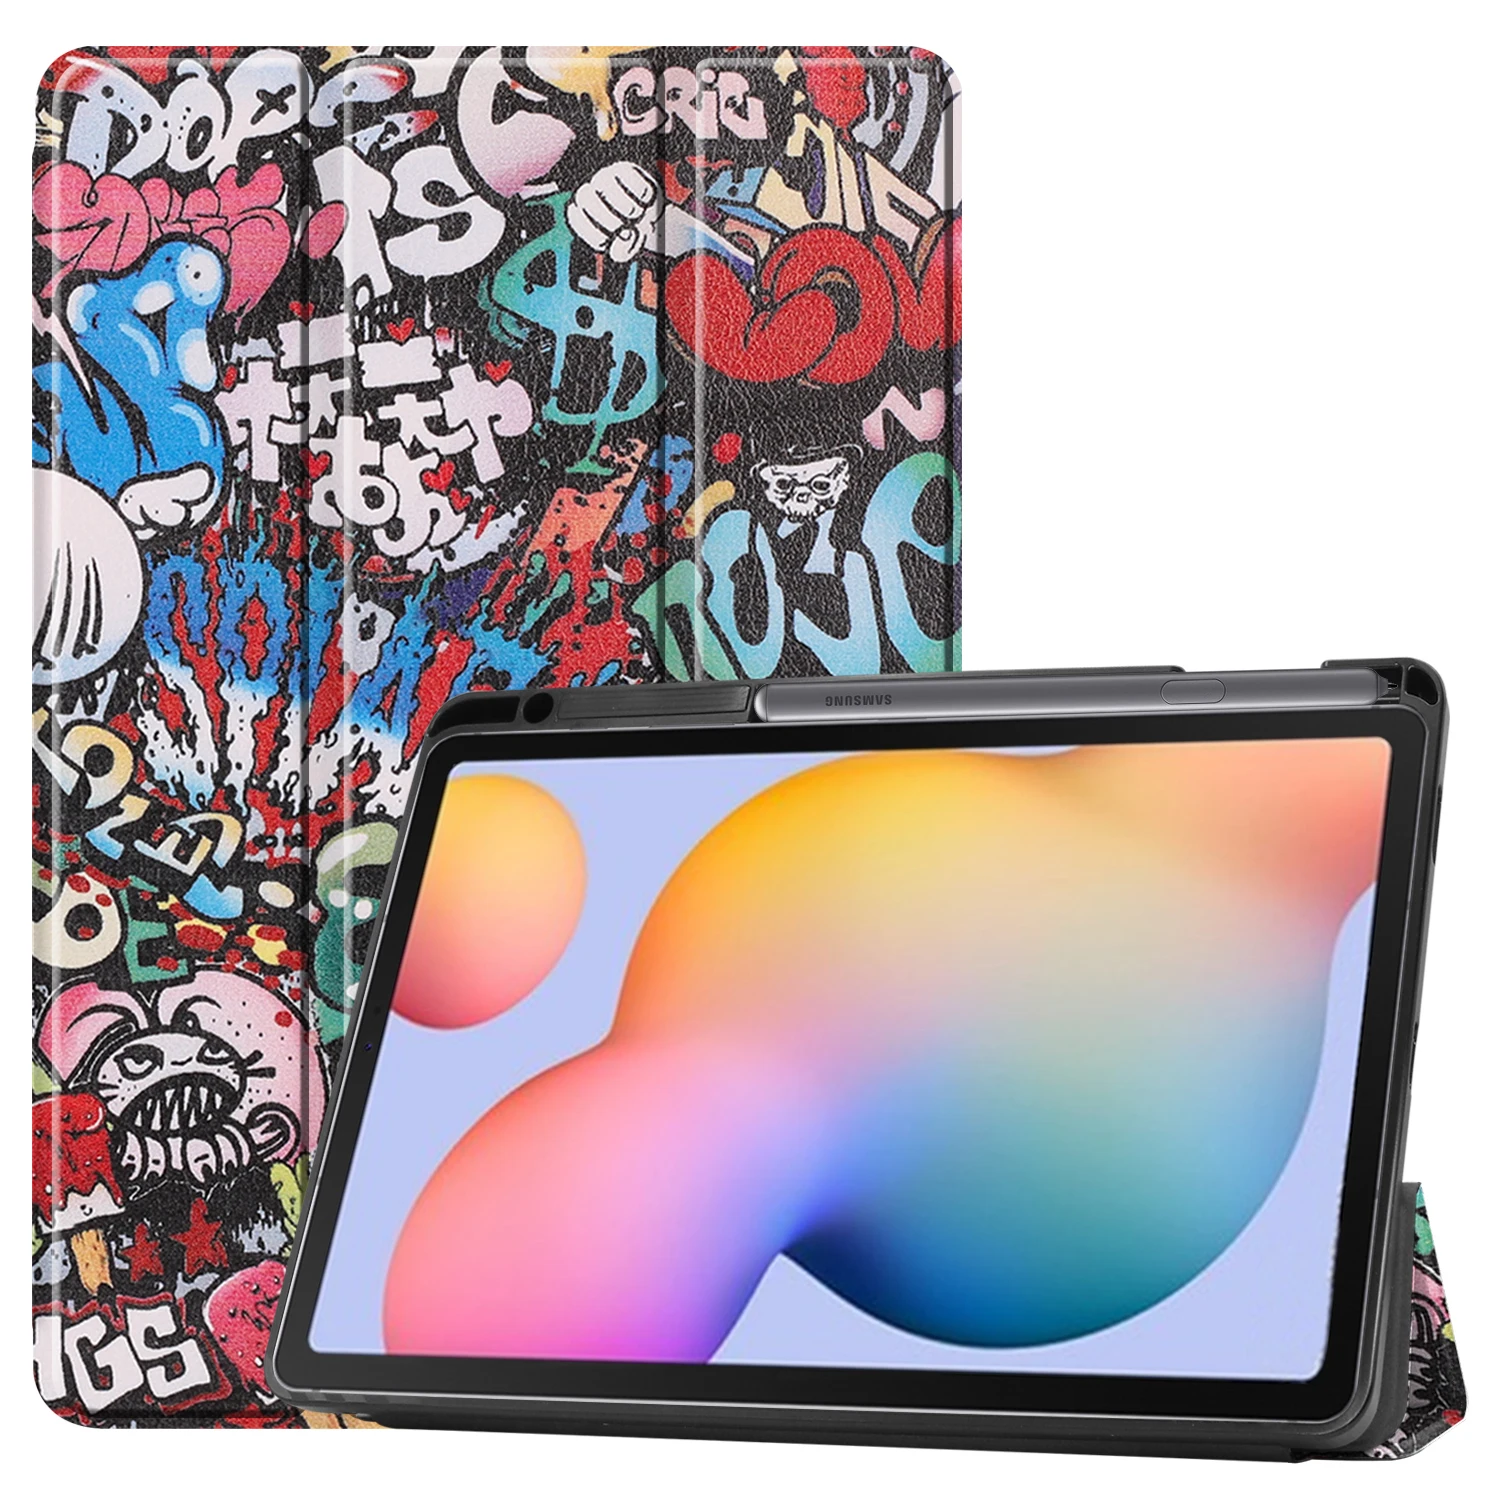 

Yapears Tri-Fold Stand Case for Samsung Galaxy Tab S6 lite 10.4 2020 SM P610 P615 Shockproof Back cover Graffiti